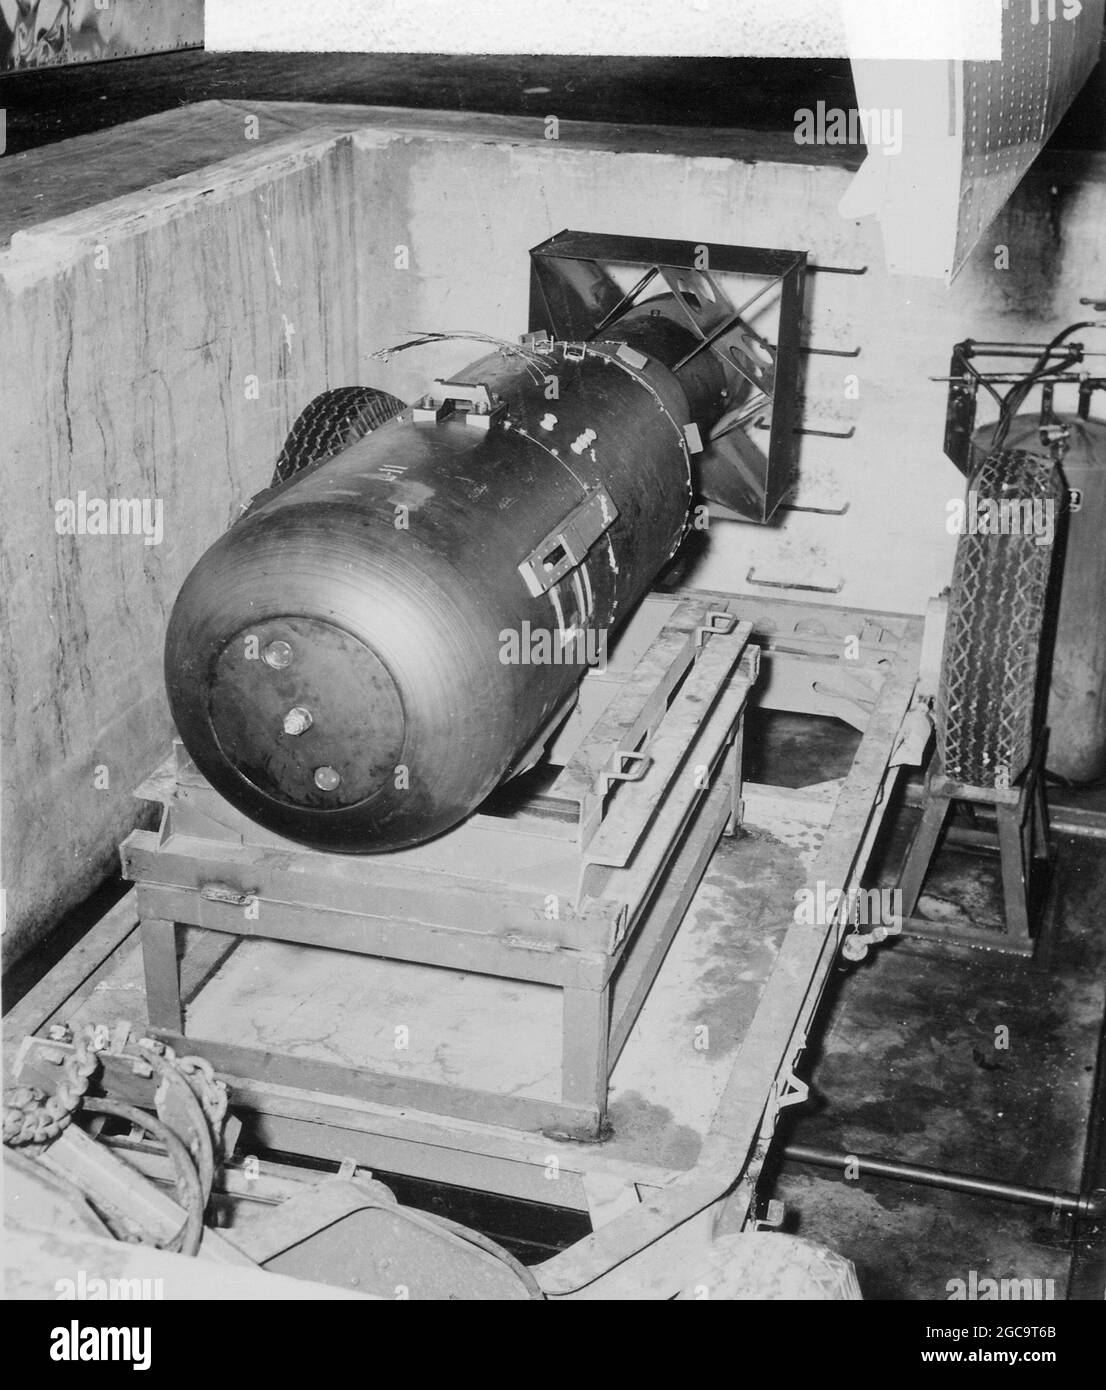 The atomic bomb Little Boy (dropped on Hiroshima) being placed on a trailer in 1945 Stock Photo